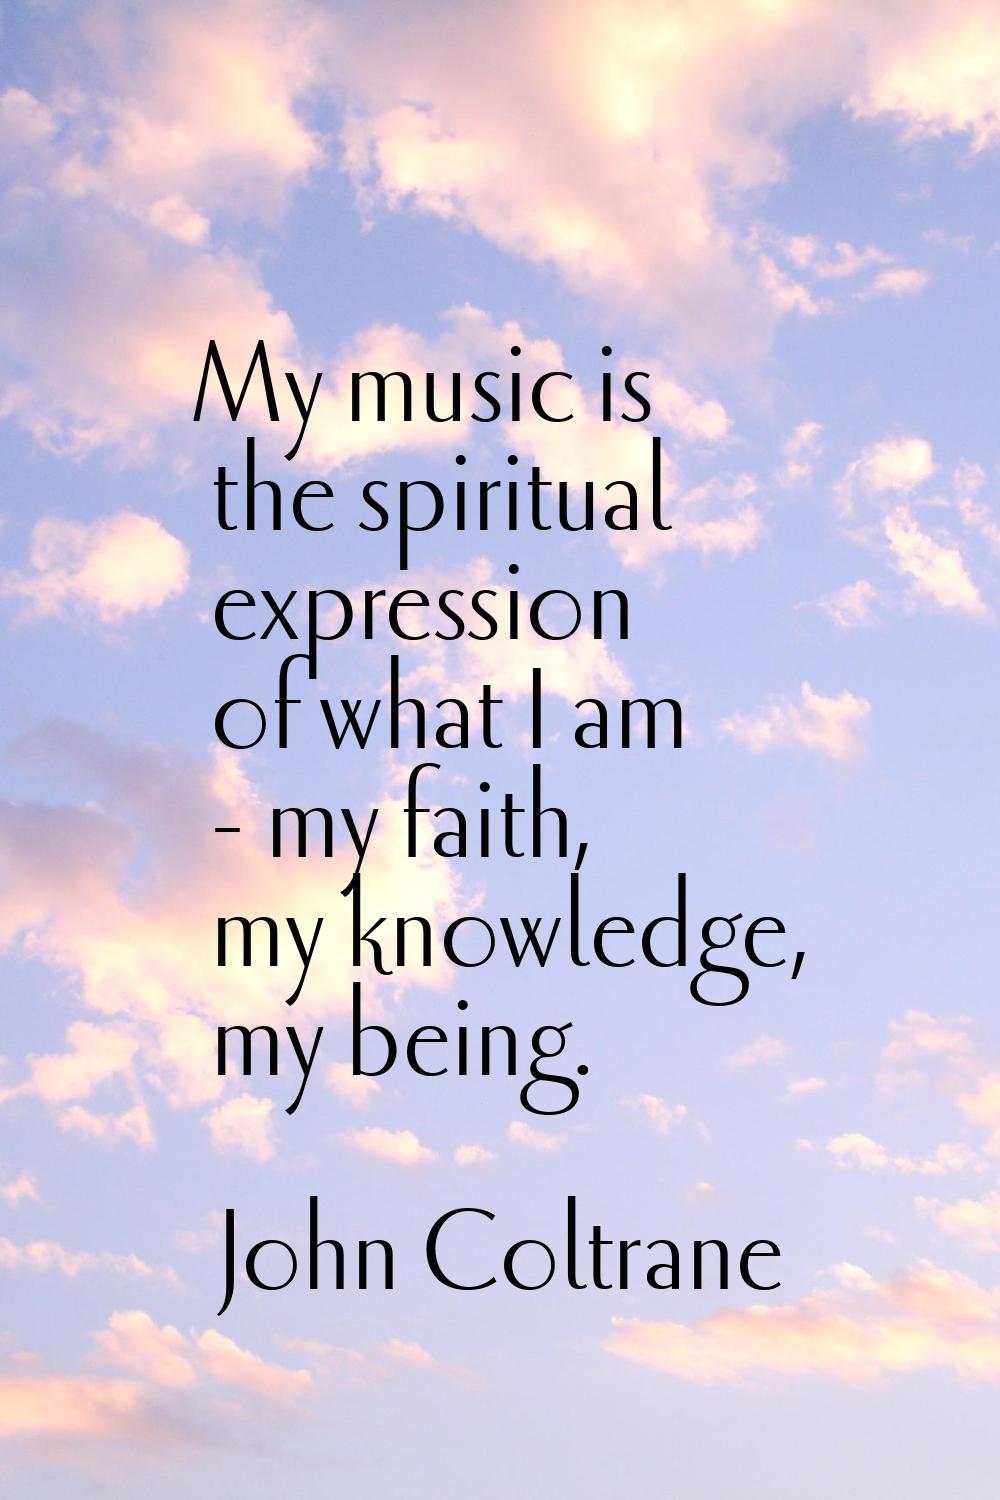 My music is the spiritual expression of what I am - my faith, my knowledge, my being.